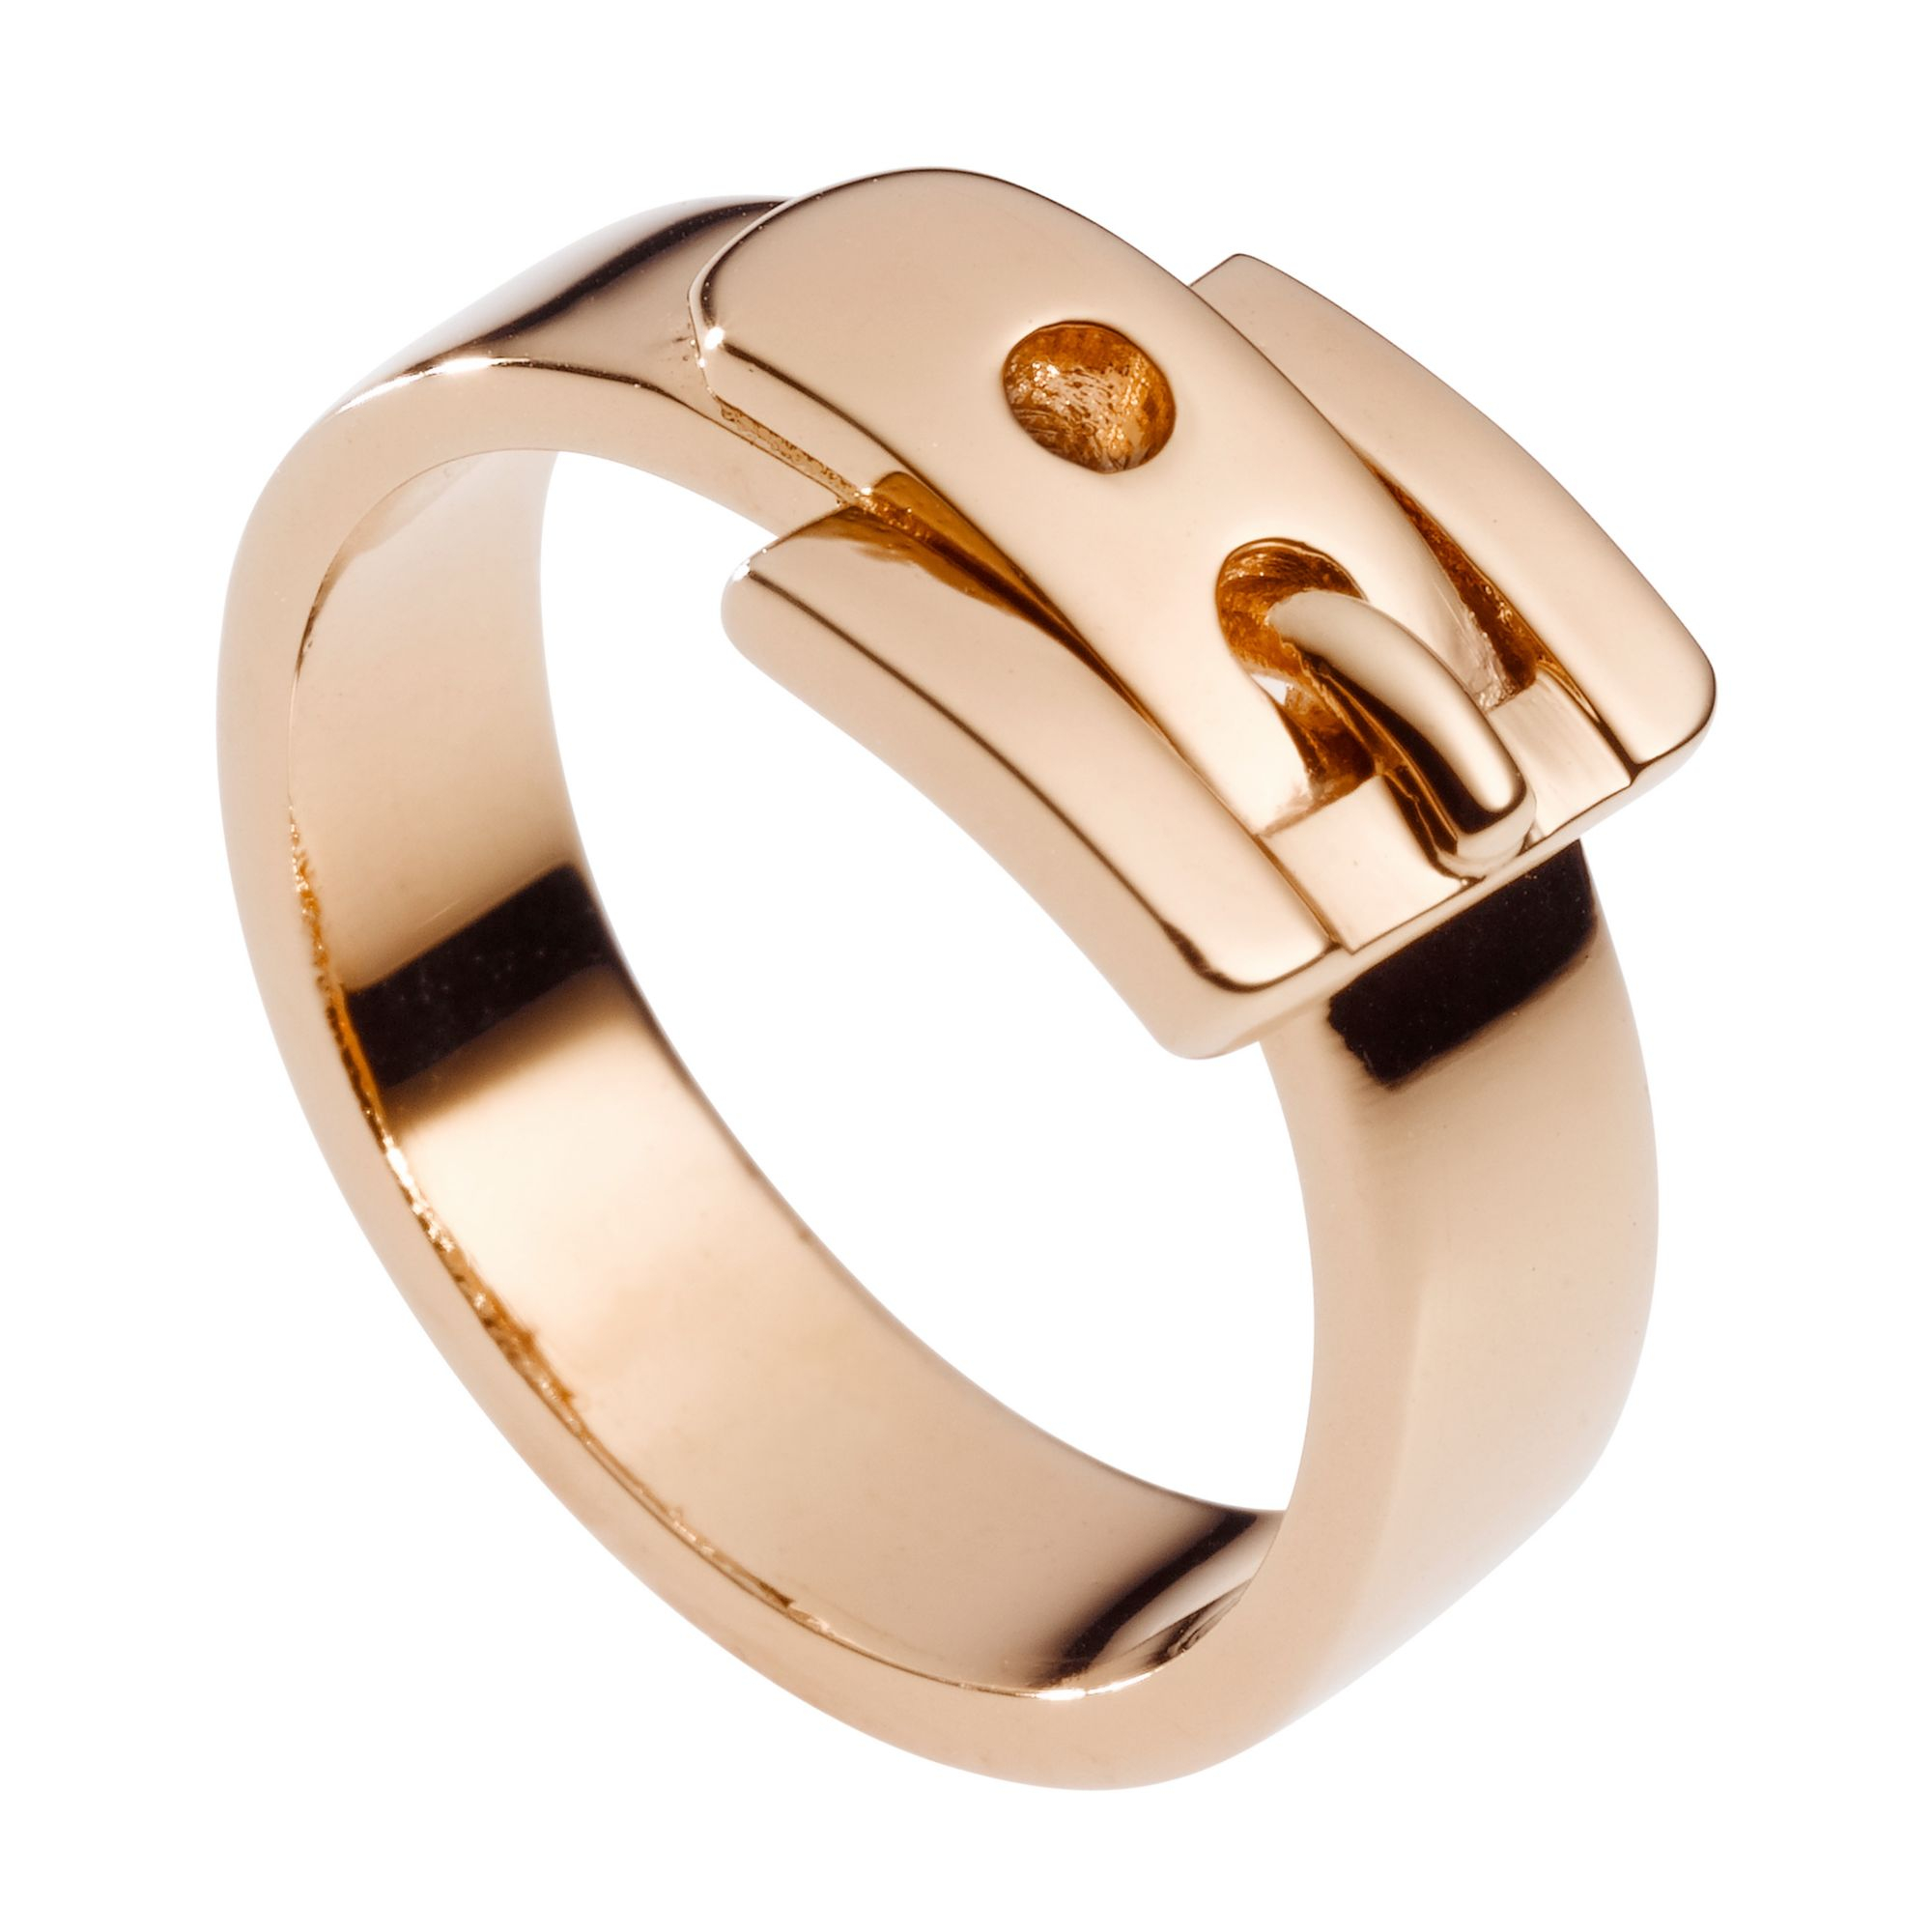 Michael Kors Rose Gold Tone Buckle Ring in Pink - Lyst